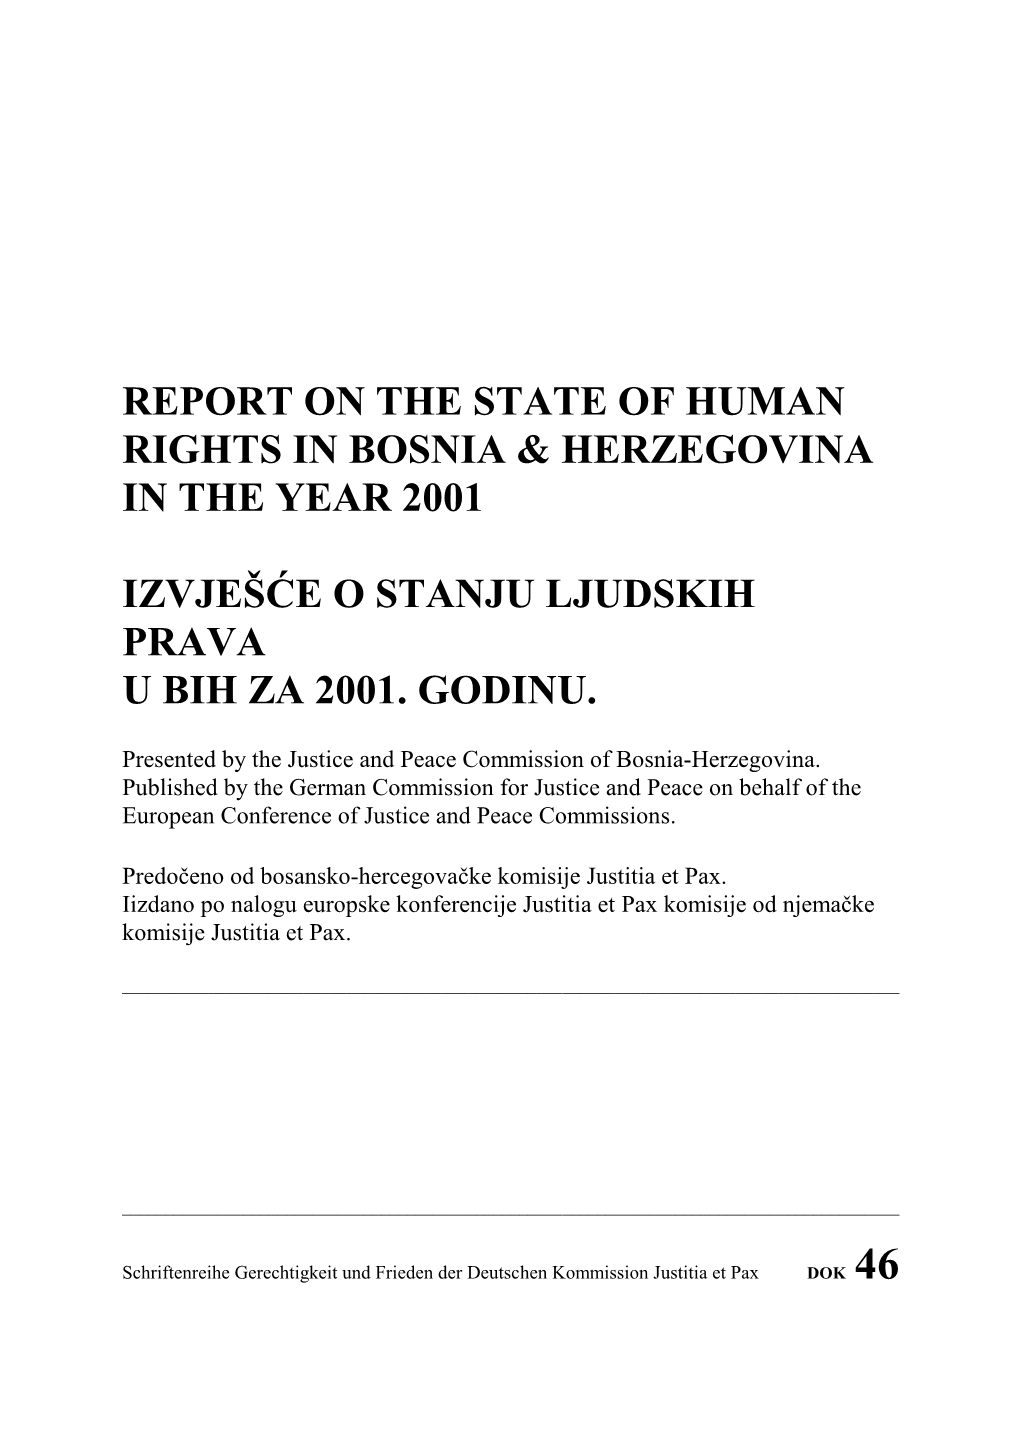 Report on the State of Human Rights in Bosnia & Herzegovina in the Year